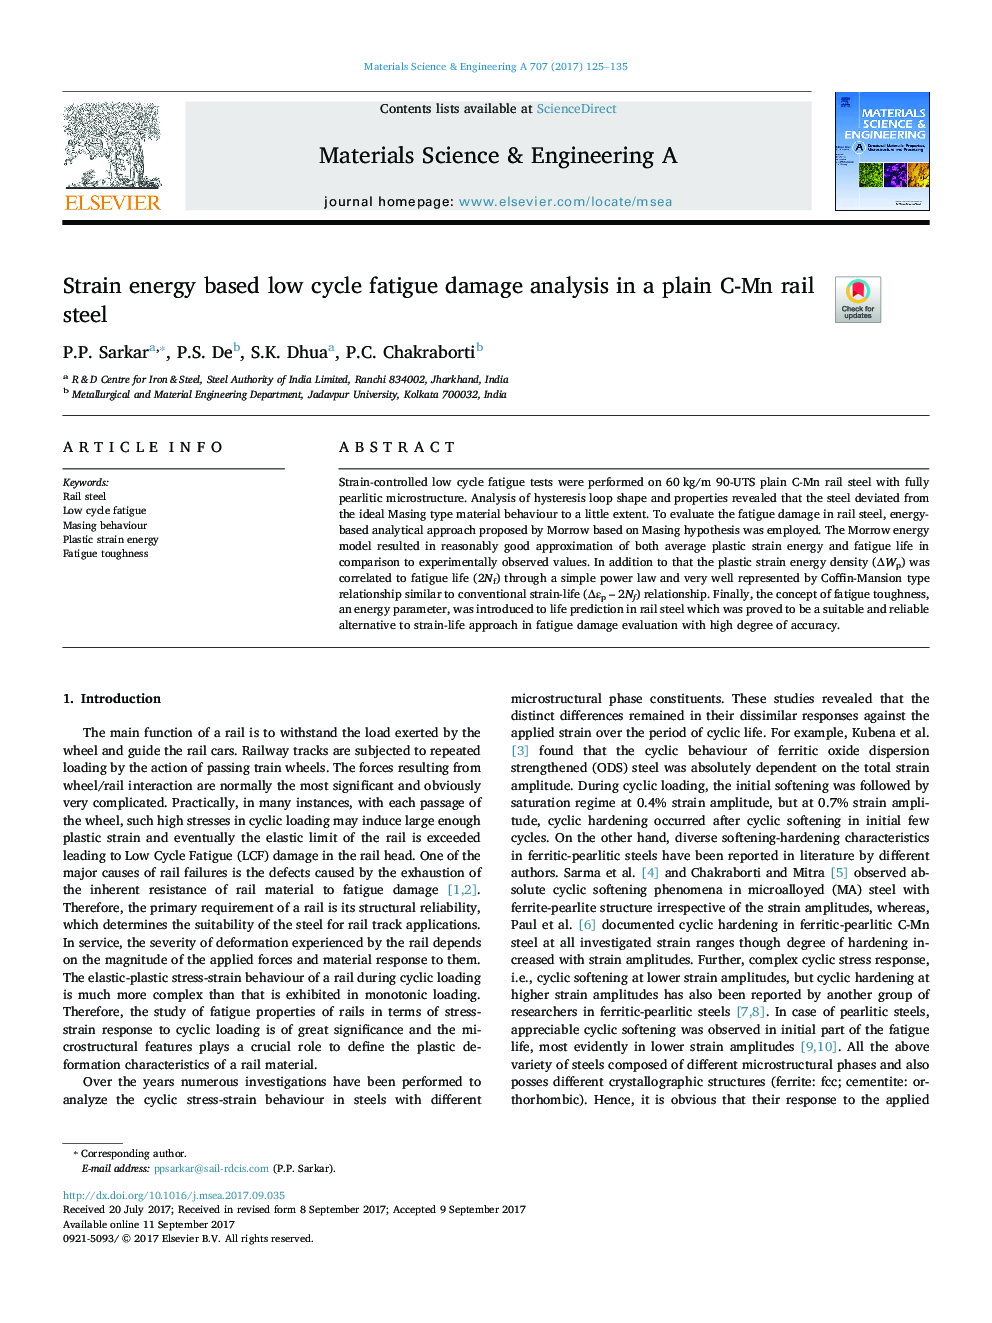 Strain energy based low cycle fatigue damage analysis in a plain C-Mn rail steel